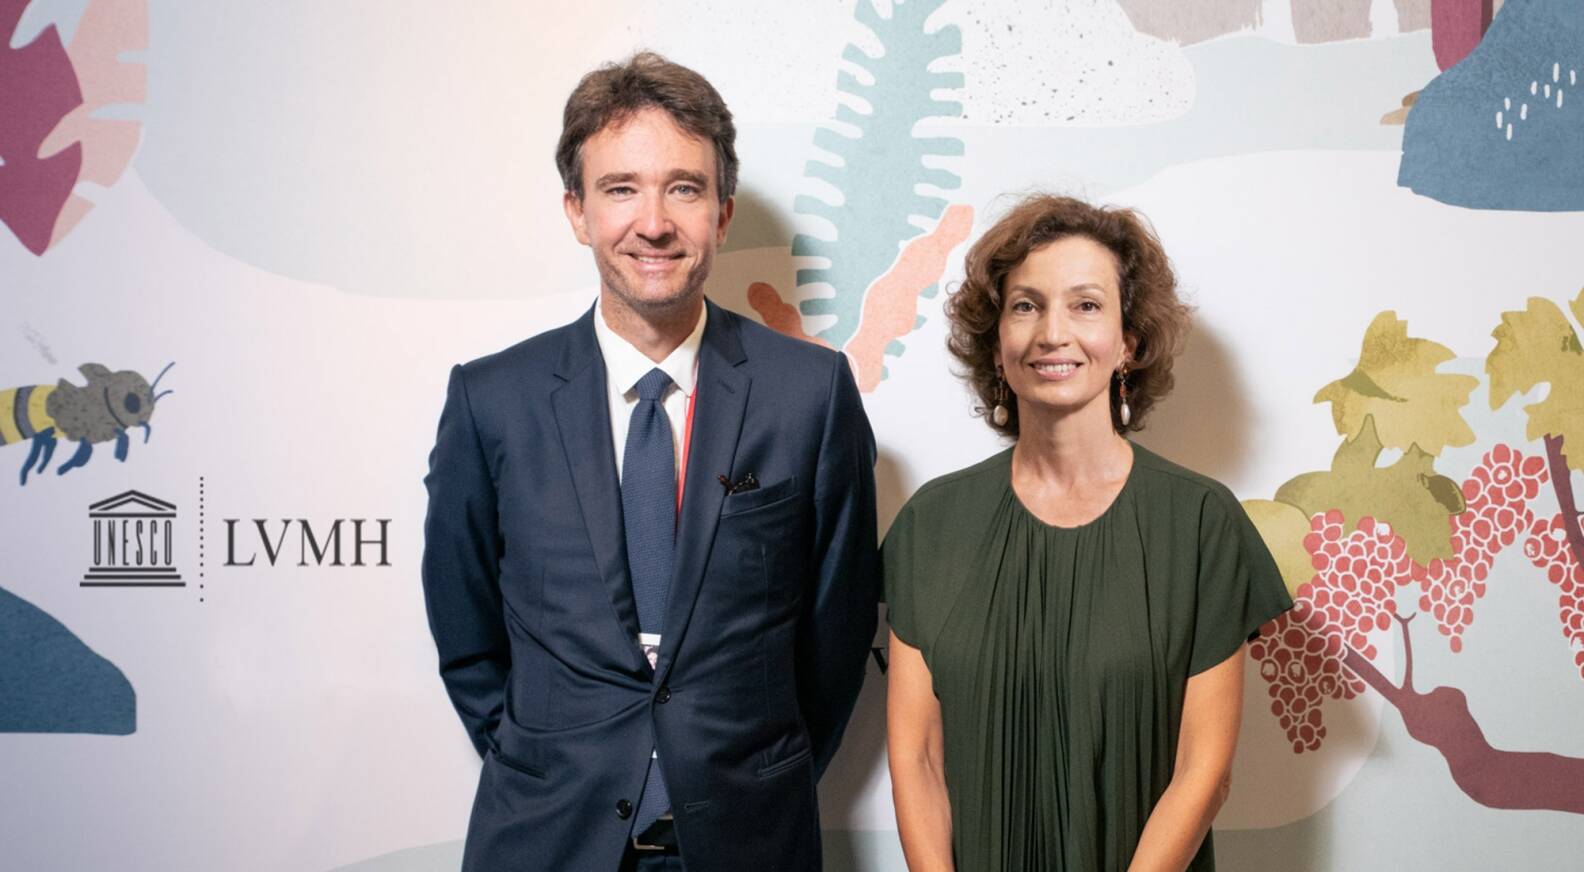 LVMH's Philanthropy Arm Gives 5 Million Euros for COVID-19 Research – WWD